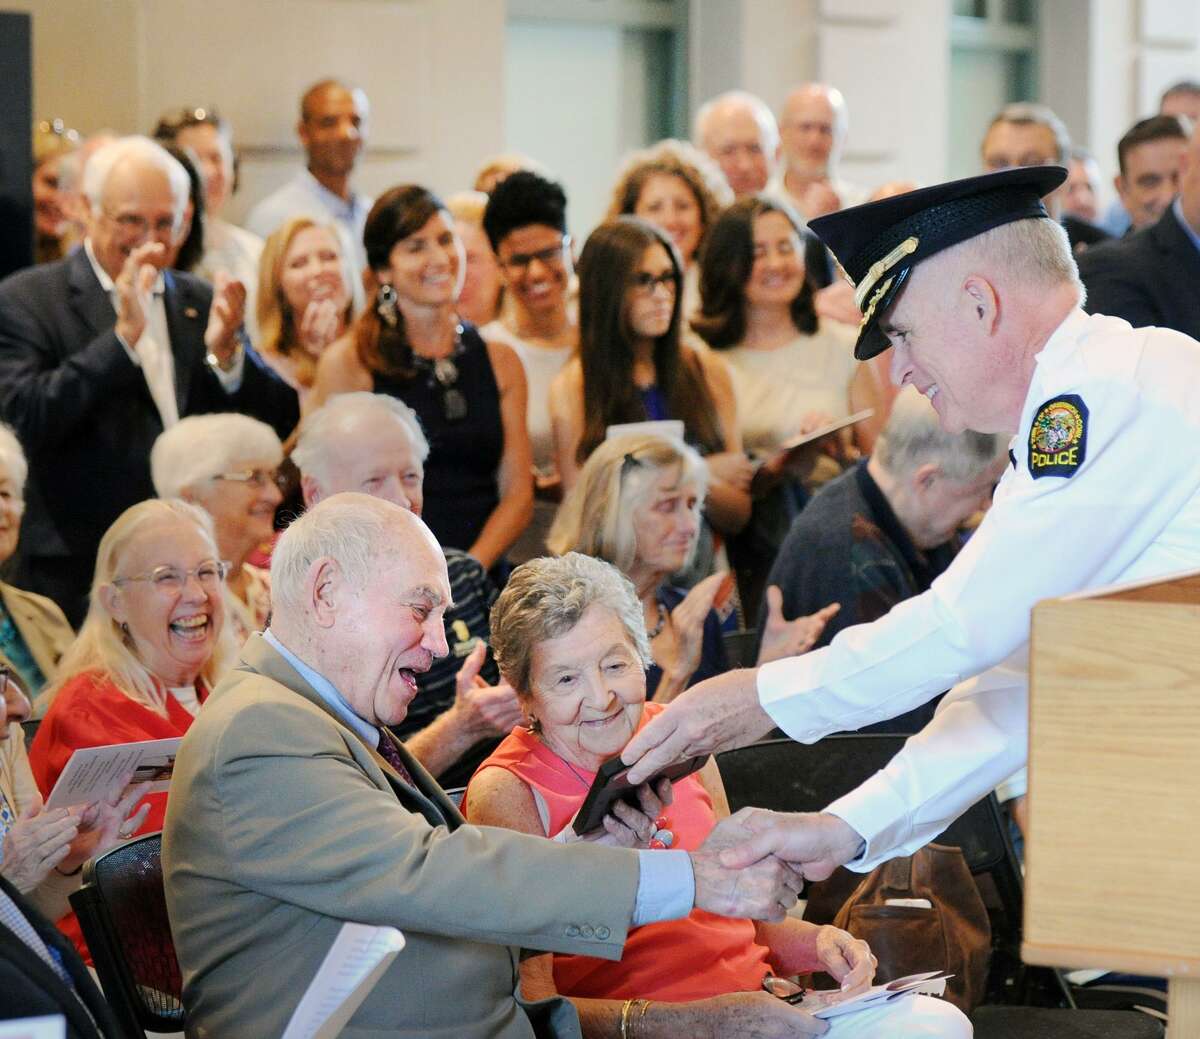 With his wife Dolly, center, looking on, John Margenot smiles as Greenwich Police Chief Jim Heavey gives Margenot a photo of when Margenot, serving as Greenwich First Selectman, swore Heavey in as a police officer during a ceremony and dedication of the John Margenot Atrium in his honor at the Public Safety Complex in Greenwich, Conn., Saturday, Sept. 8, 2018. Margenot, a former long-serving Greenwich First Selectman is now 90 years-old and still works as a town volunteer.